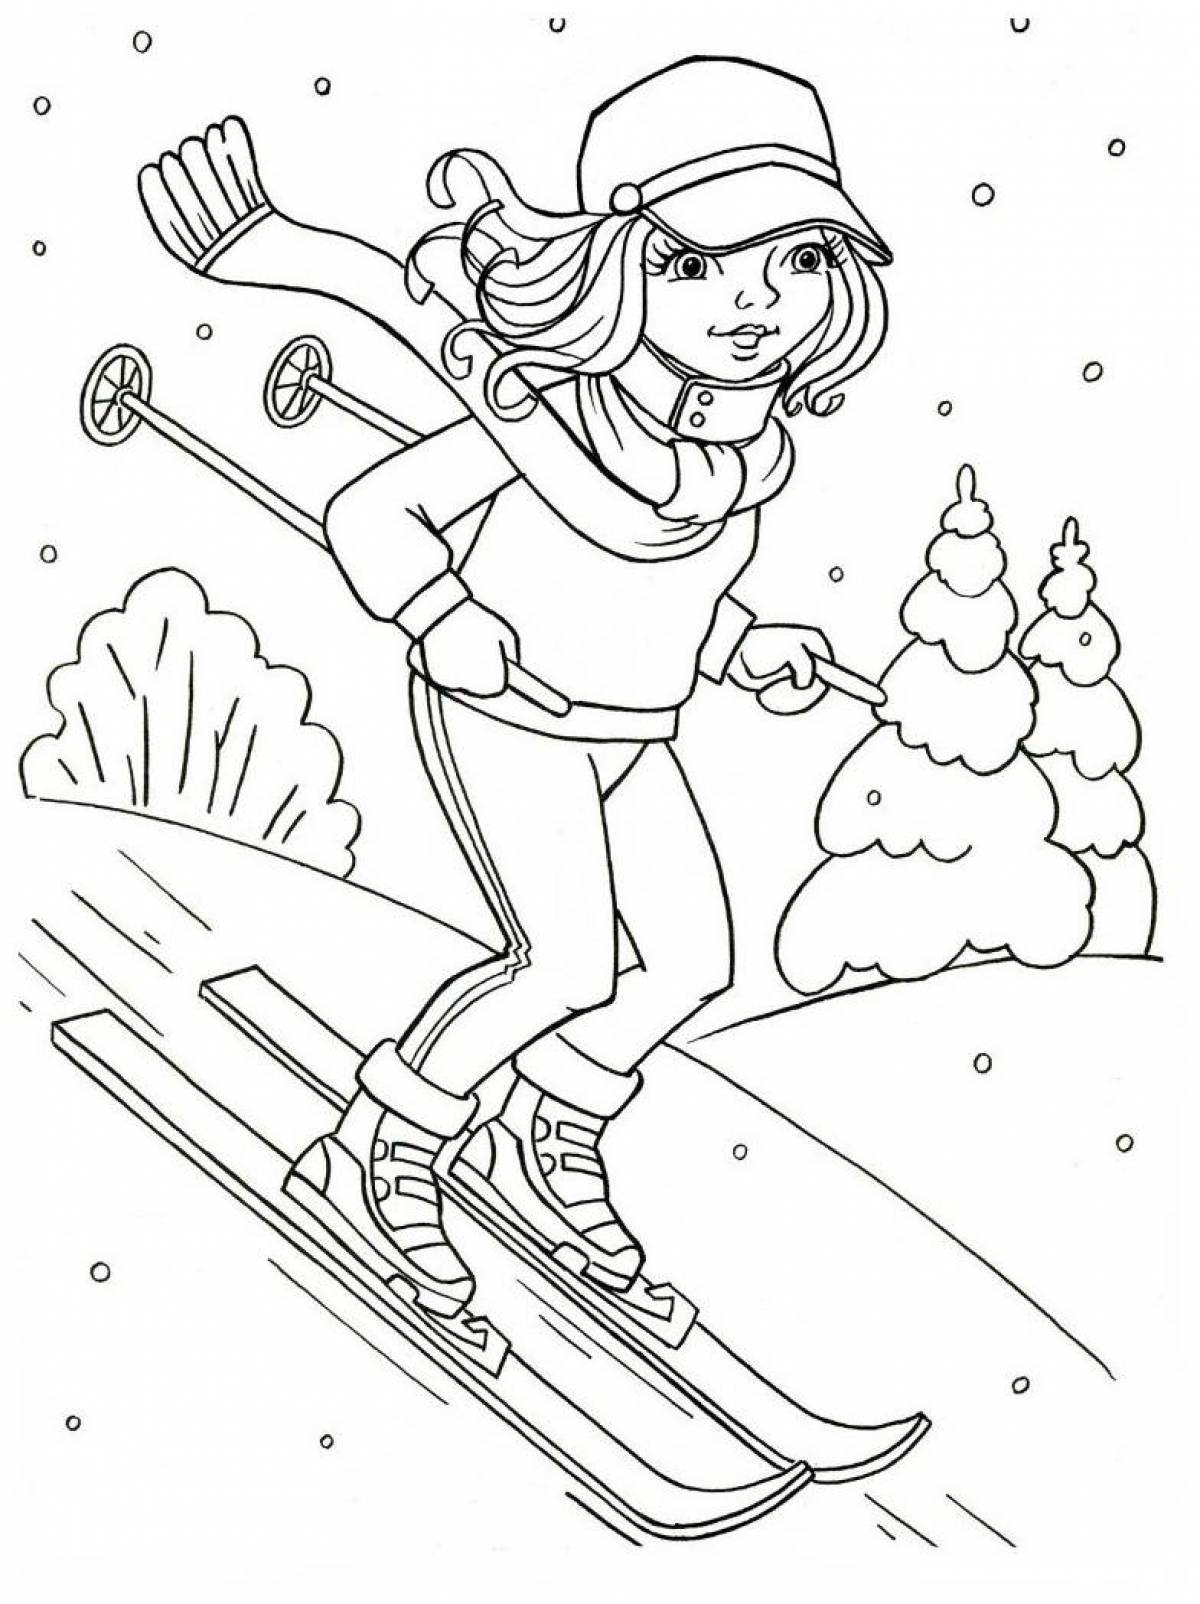 Wonderful coloring book for children 3-4 years old winter sports